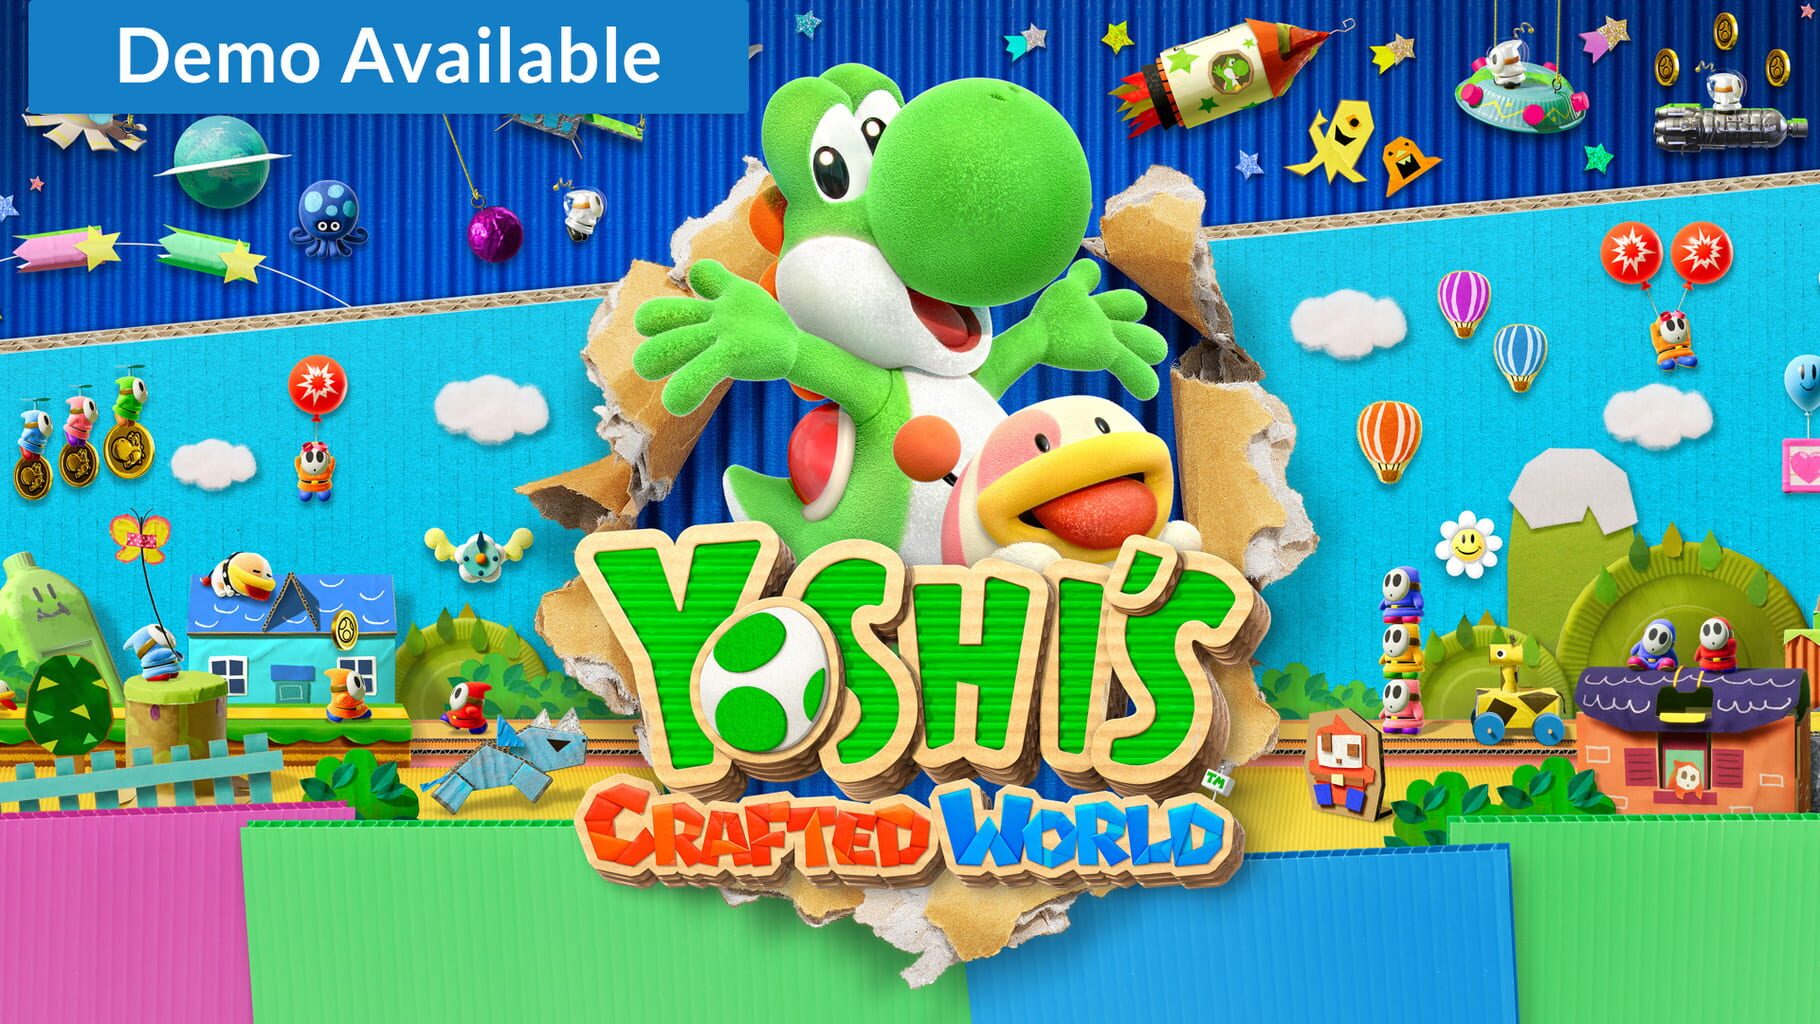 Artwork for Yoshi's Crafted World